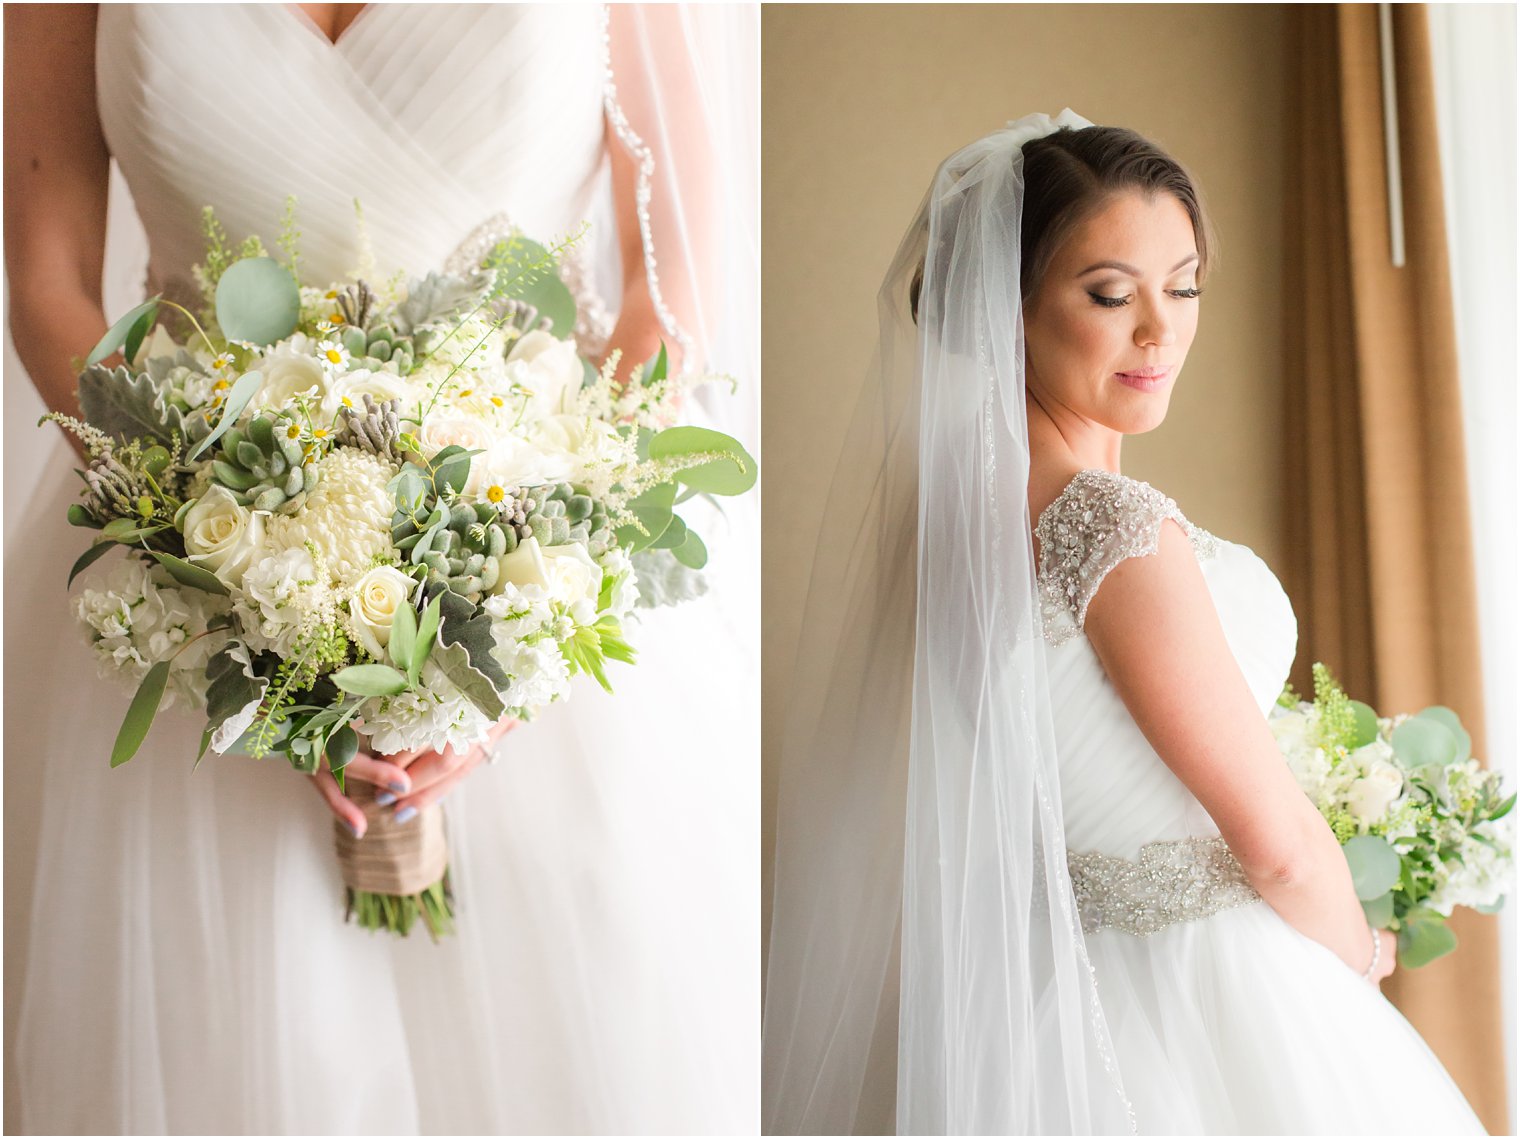 Bridal portrait and rustic bouquet at Windows on the Water at Frogbridge Wedding